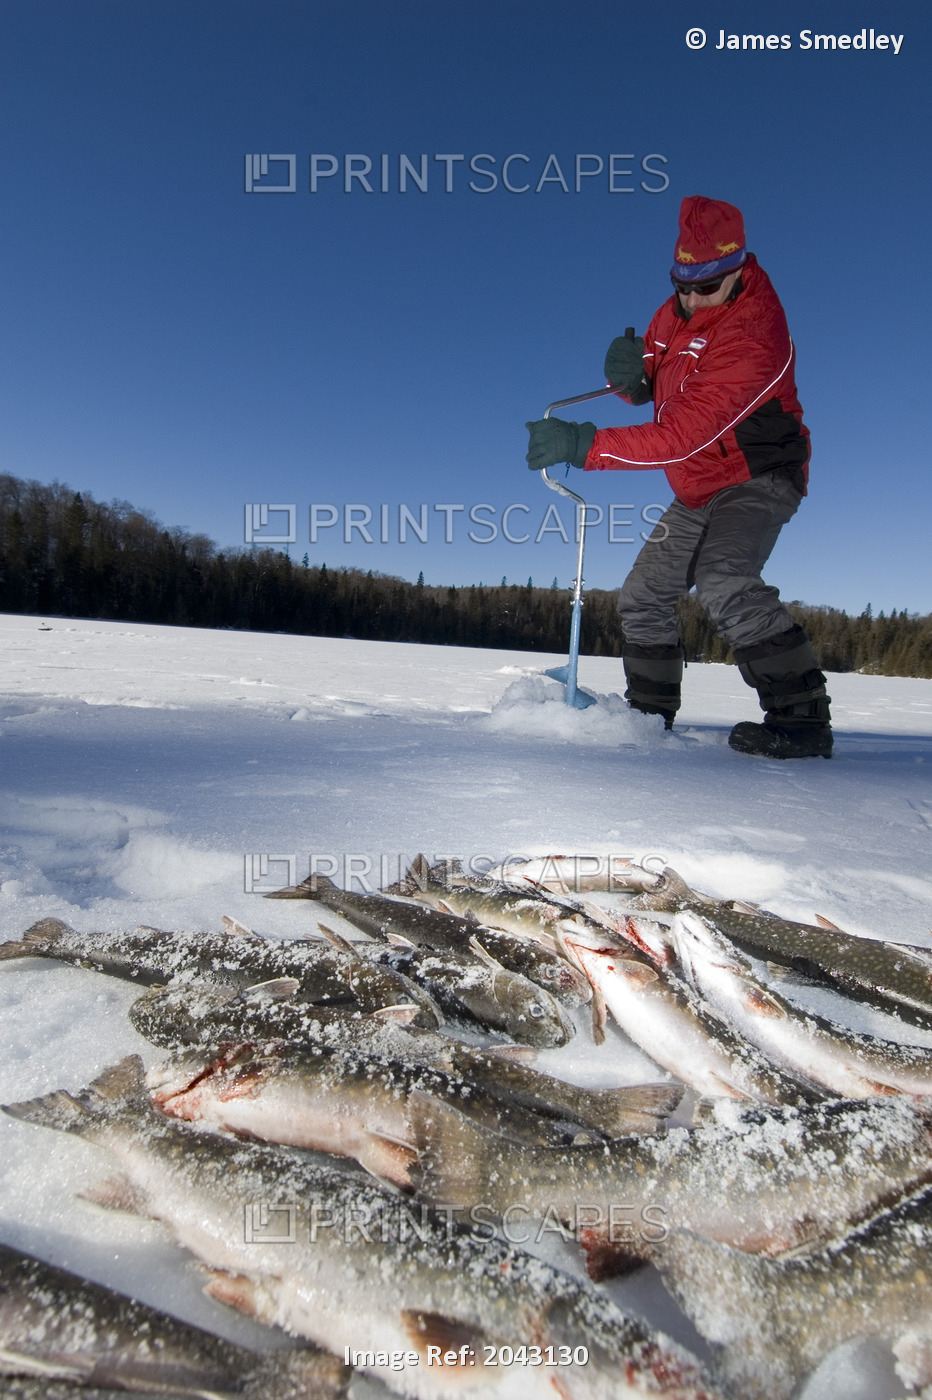 Man Digging A Borehole In A Lake For Ice Fishing With Trout In The Foreground, ...